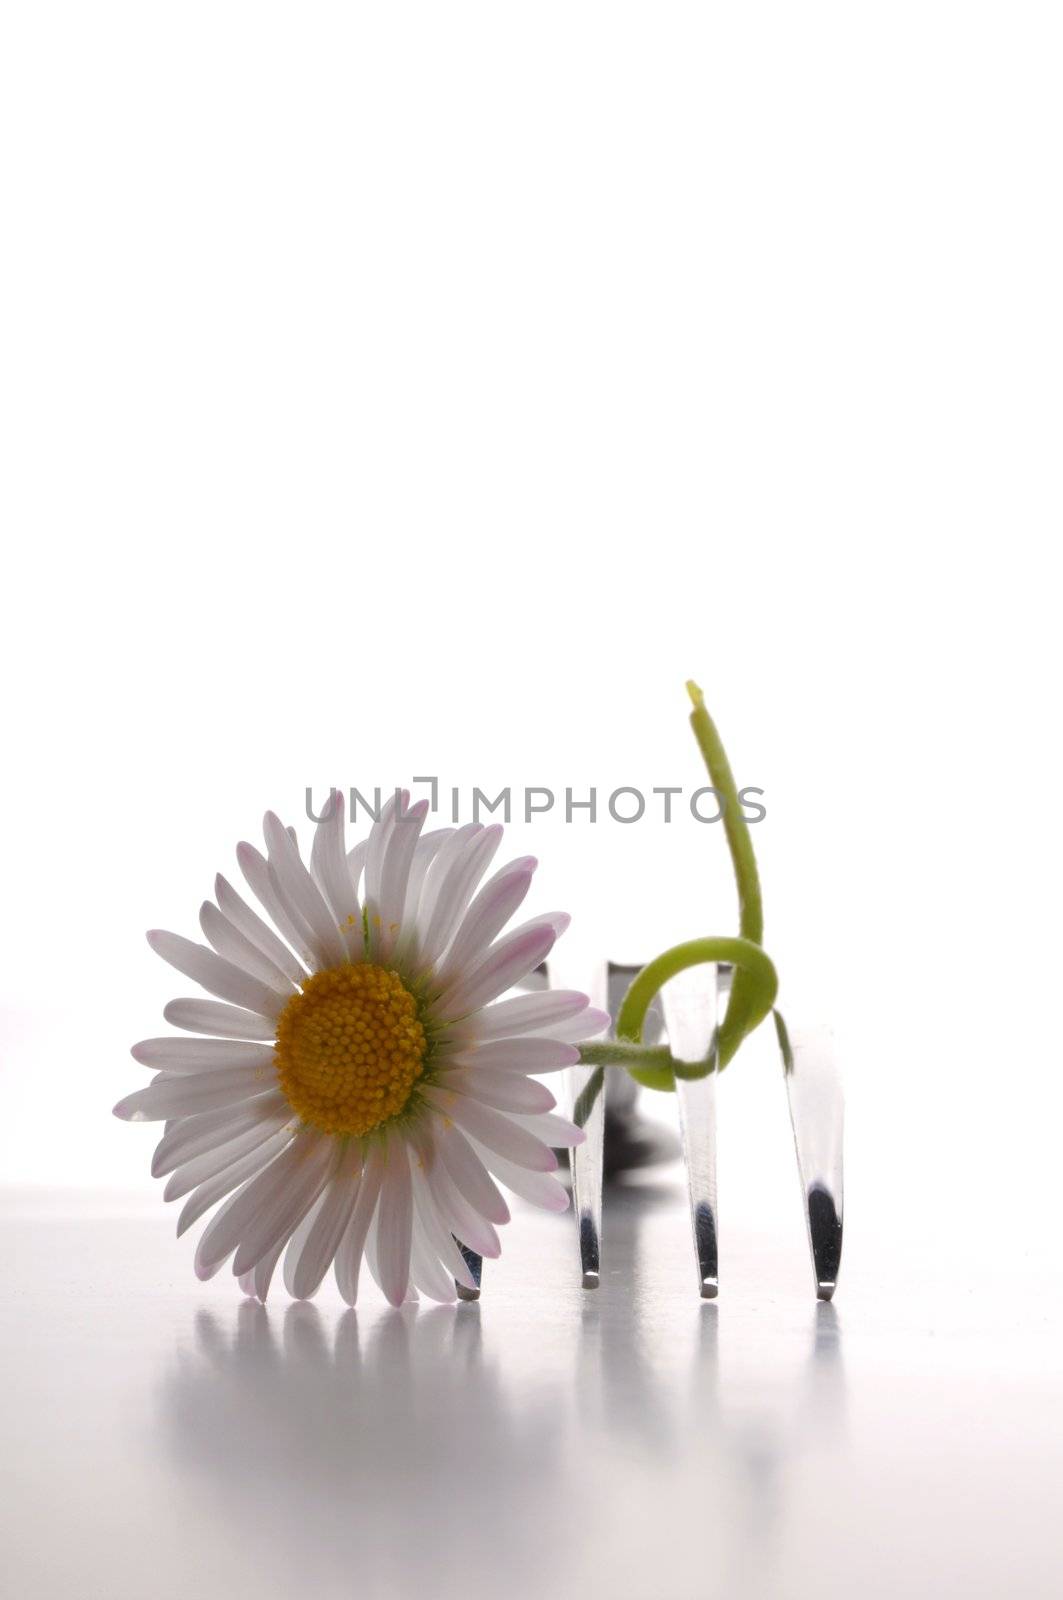 flower and fork isolated on a white background with copyspace showing food concept